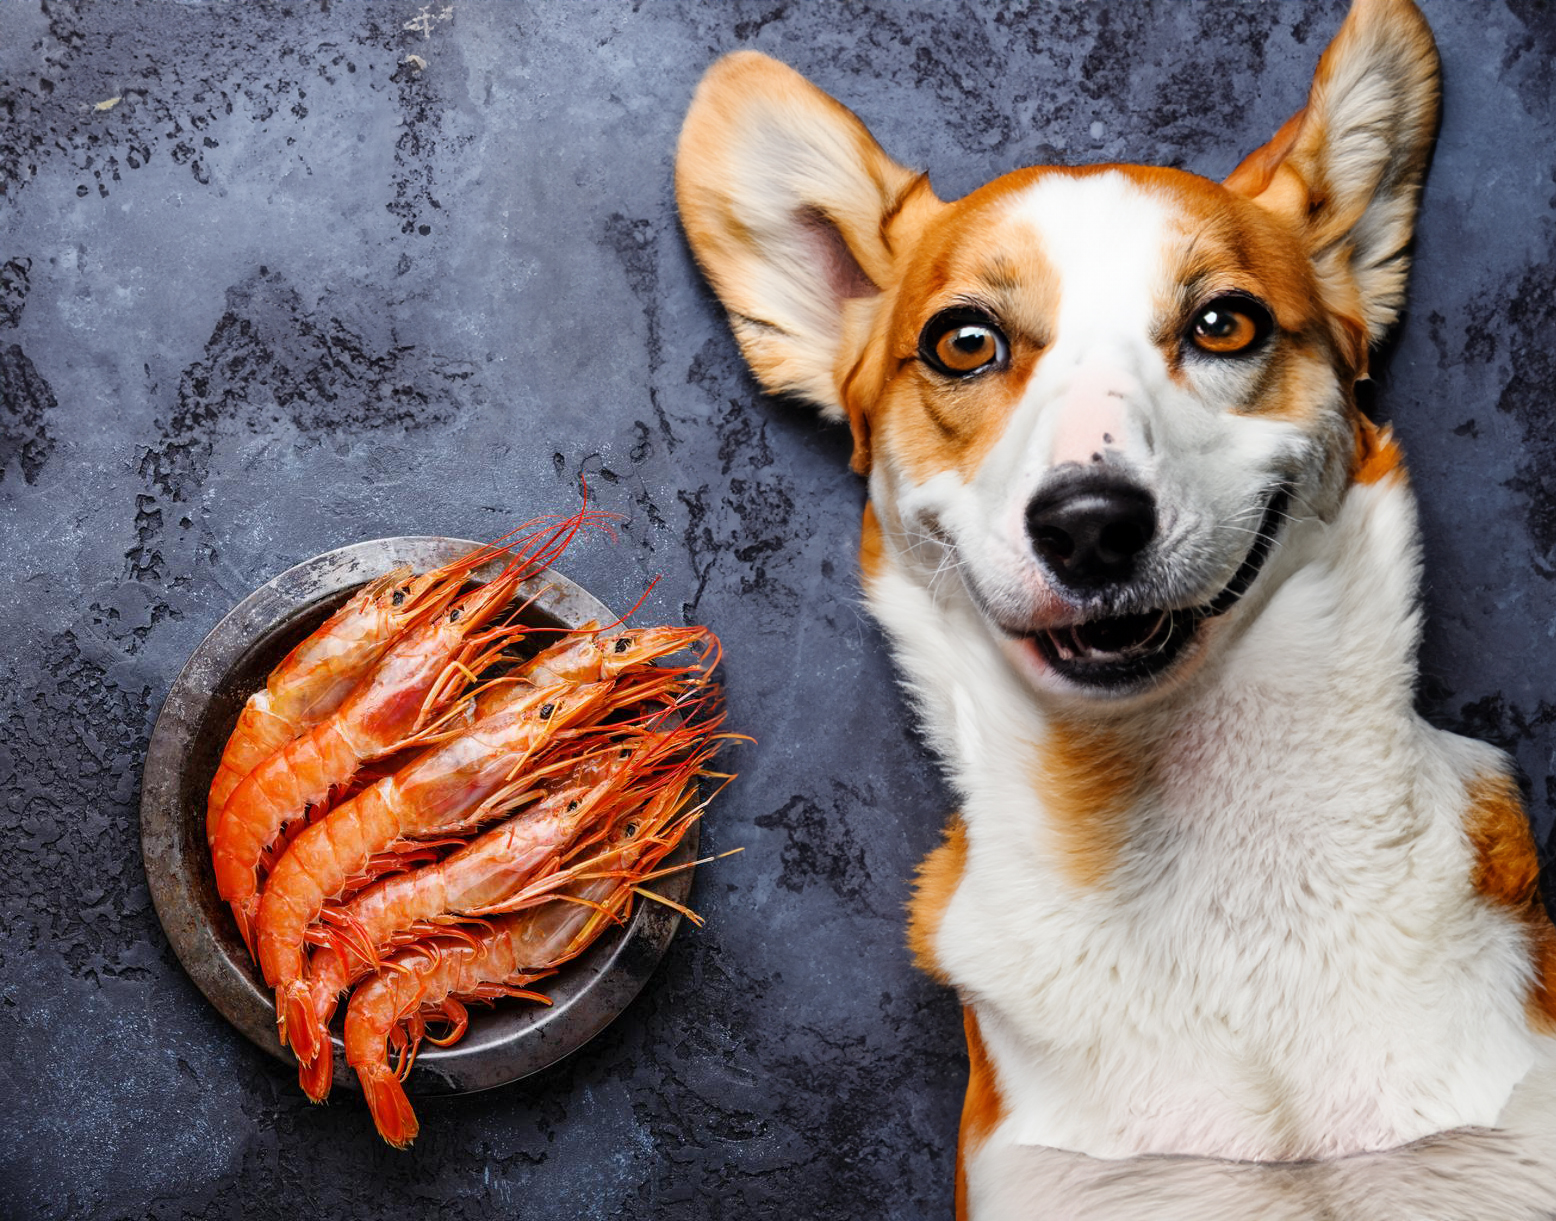 Can Dogs Eat Prawns?